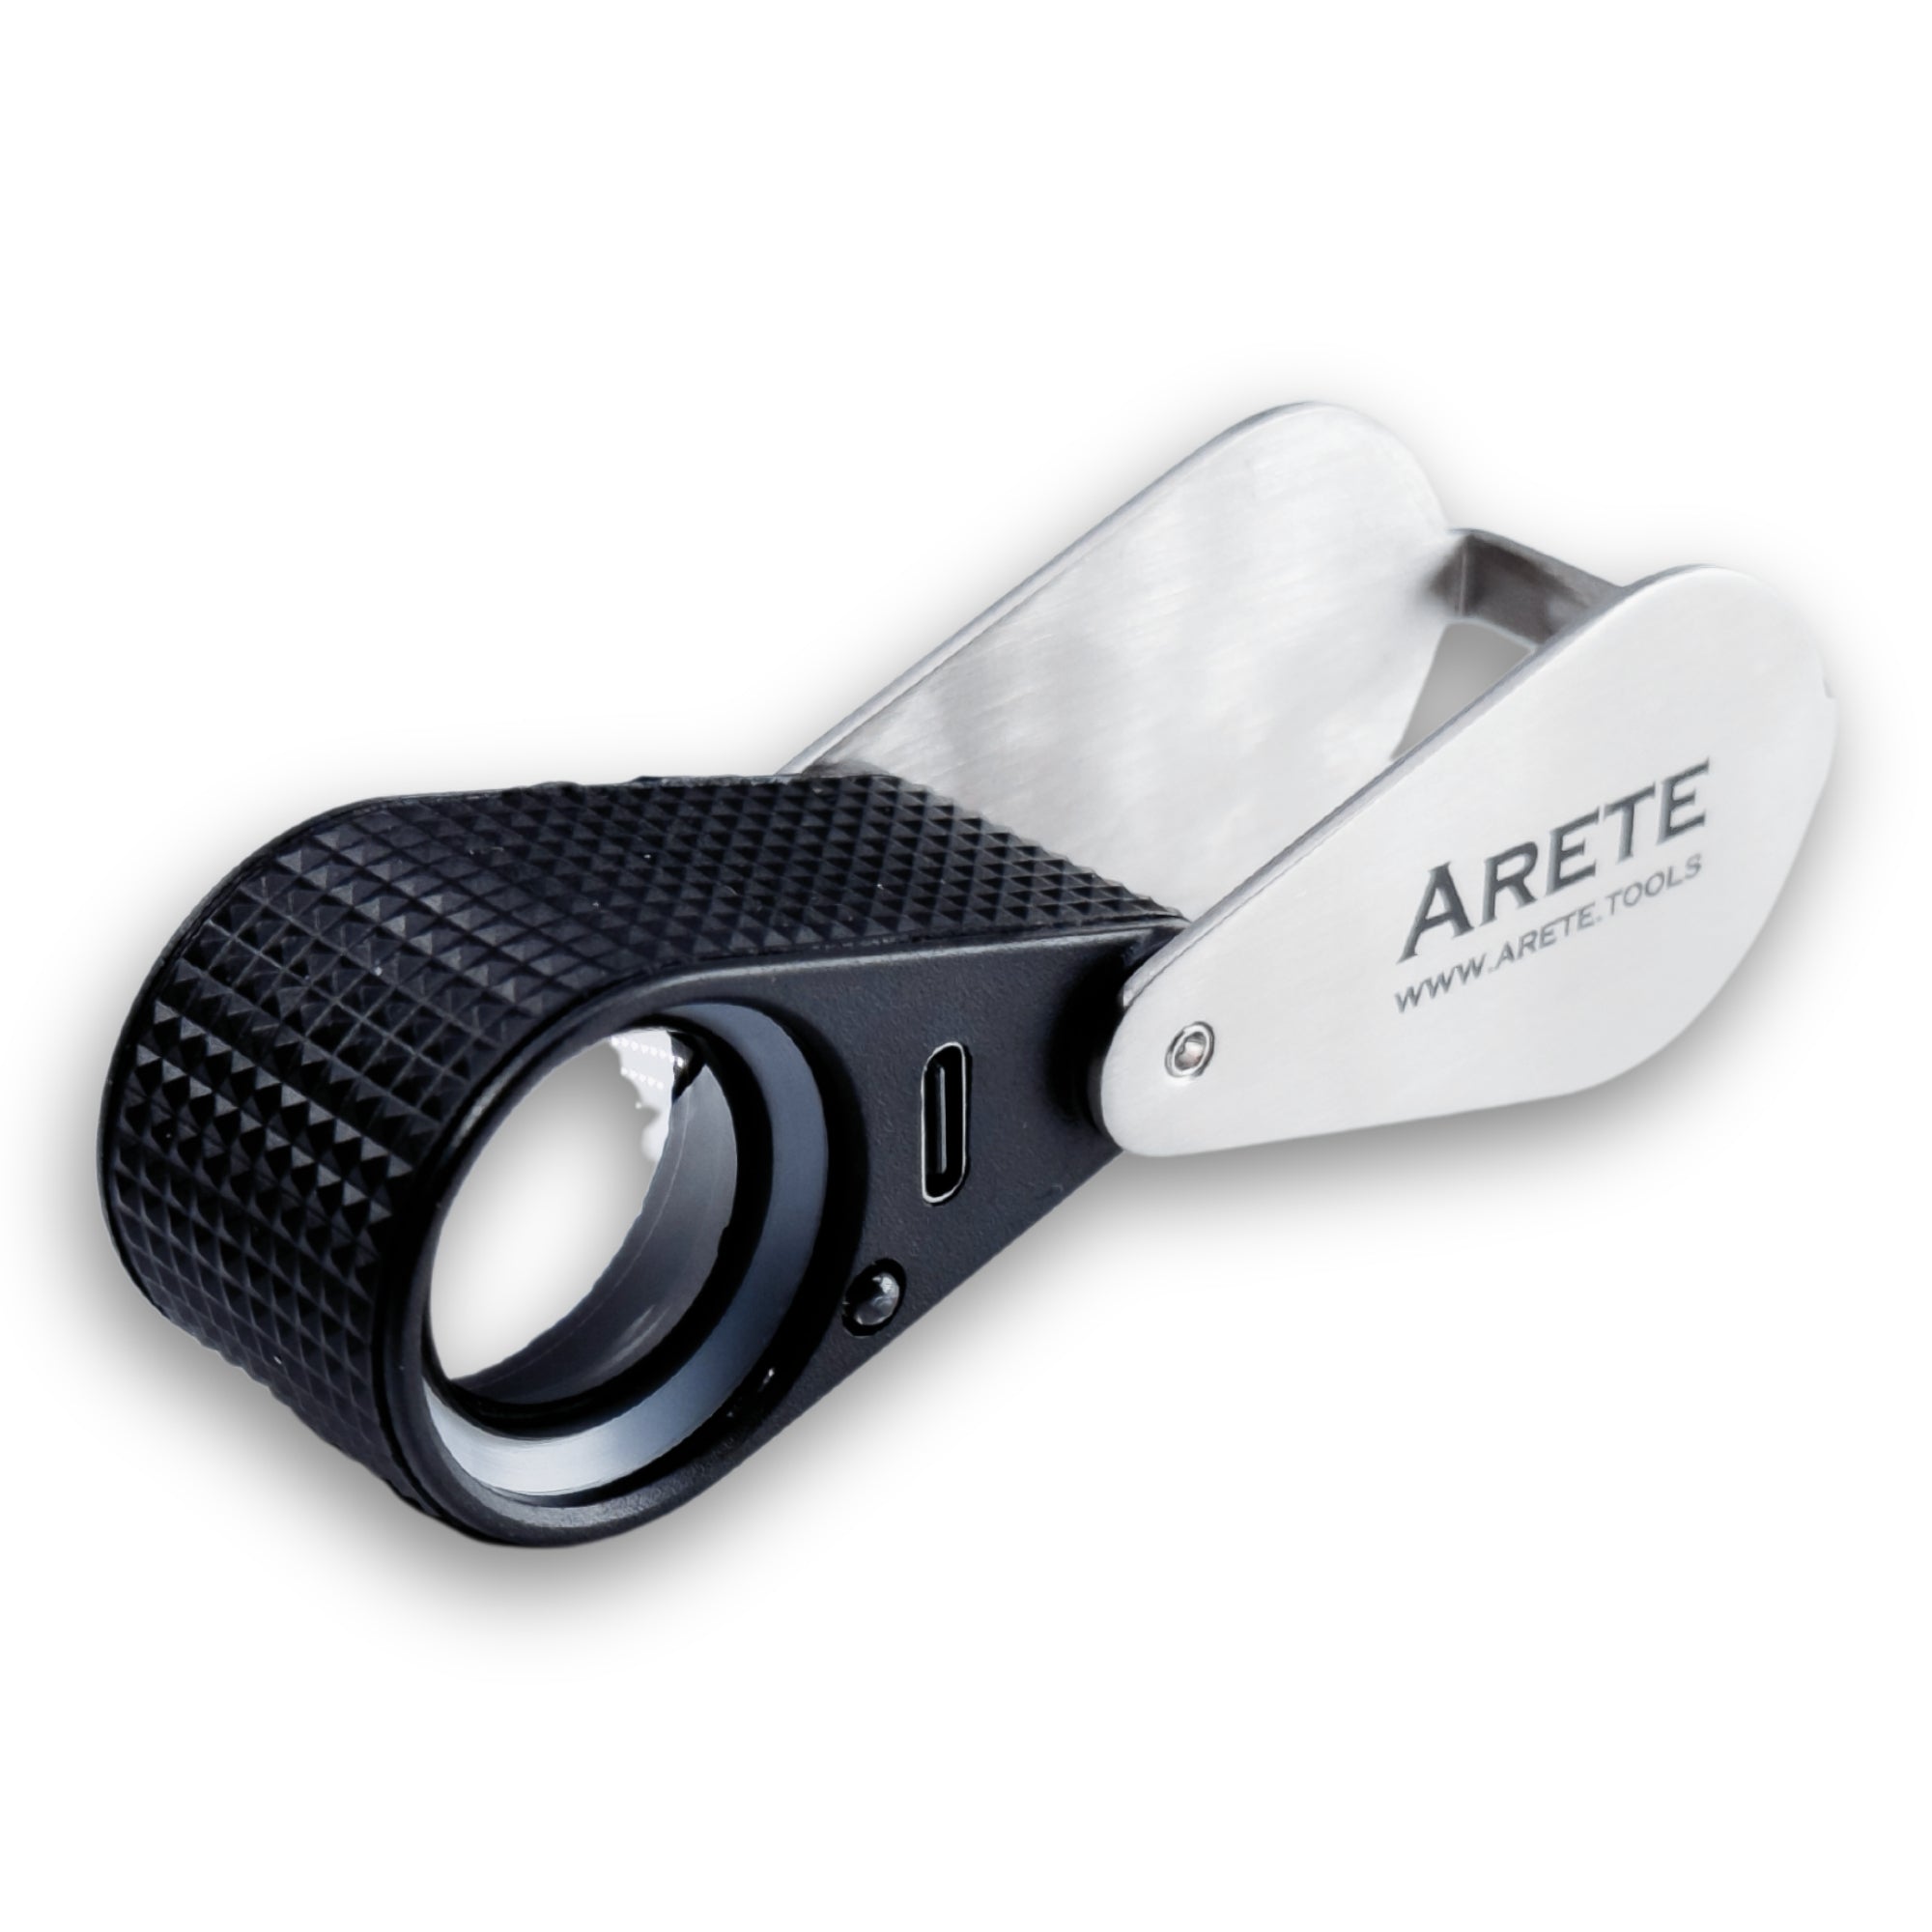 Gemological Triplet Loupe 10x with LED, UV Lighting and Achromatic Lens